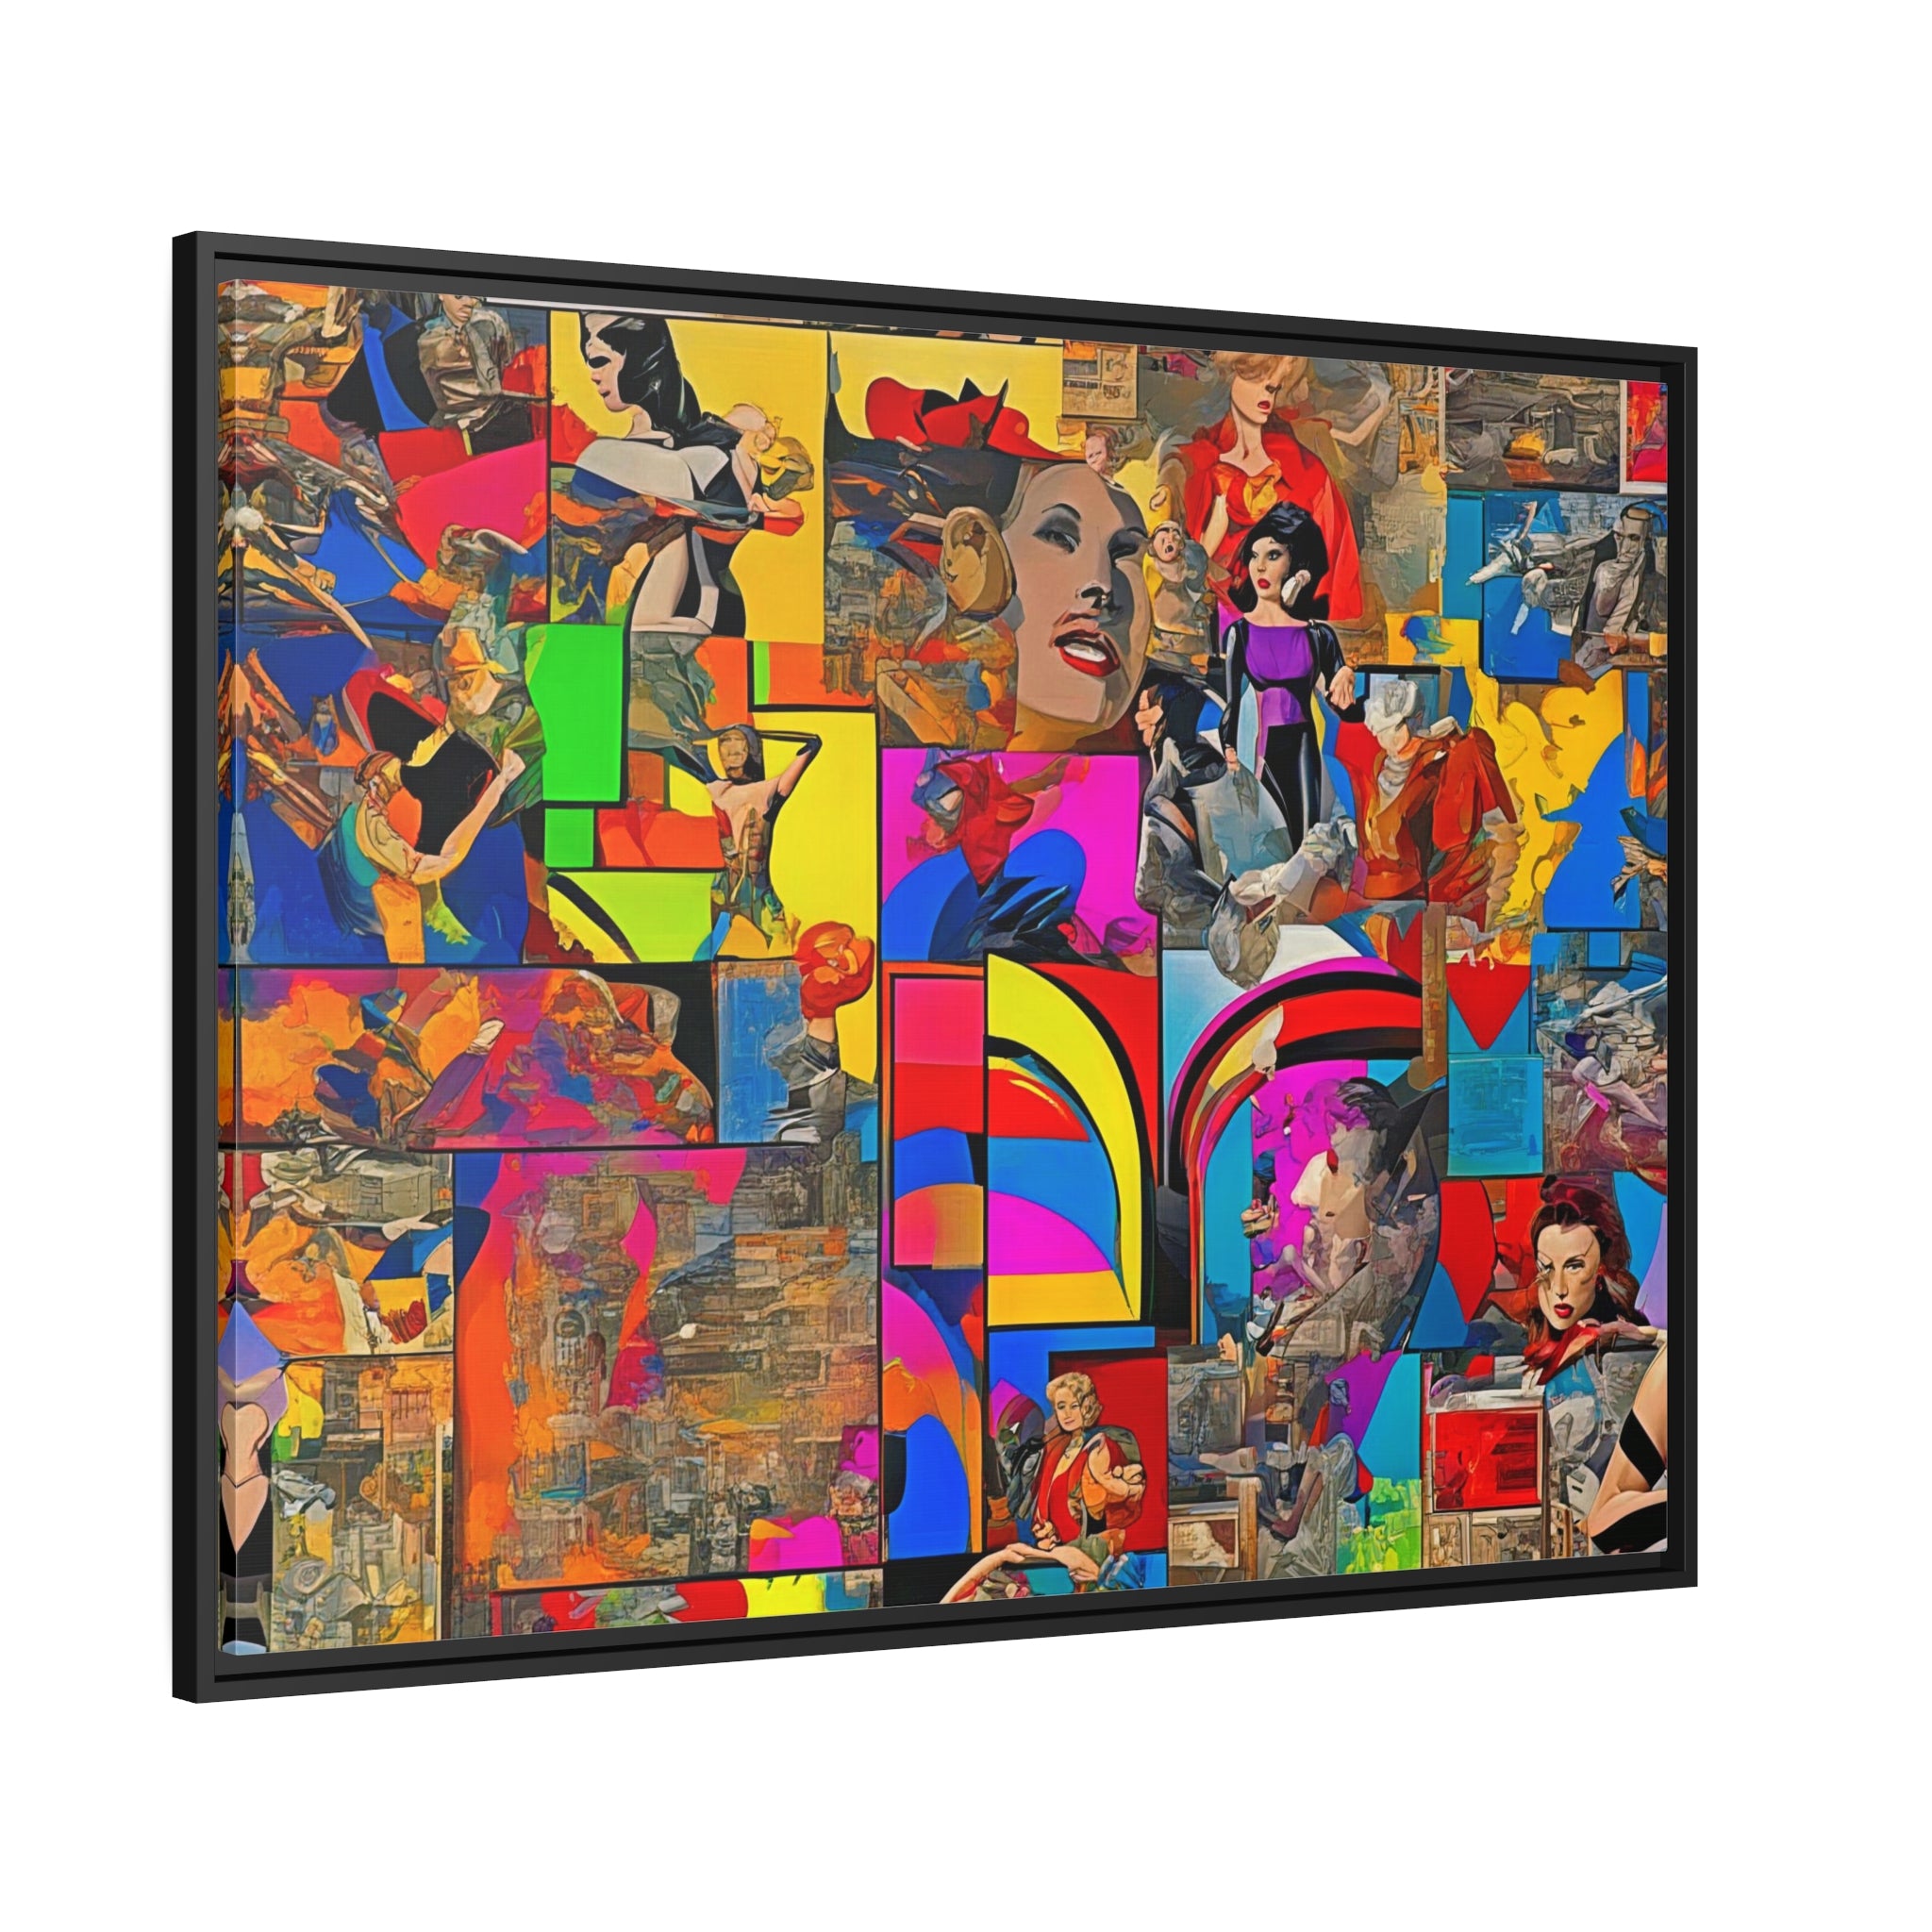 Wall Art MOVIES Pop Art Canvas Print Painting Giclee 40x30 + Frame  Love Beauty Fun Design House  Home Office Hot Decor Gift Ready to Hang